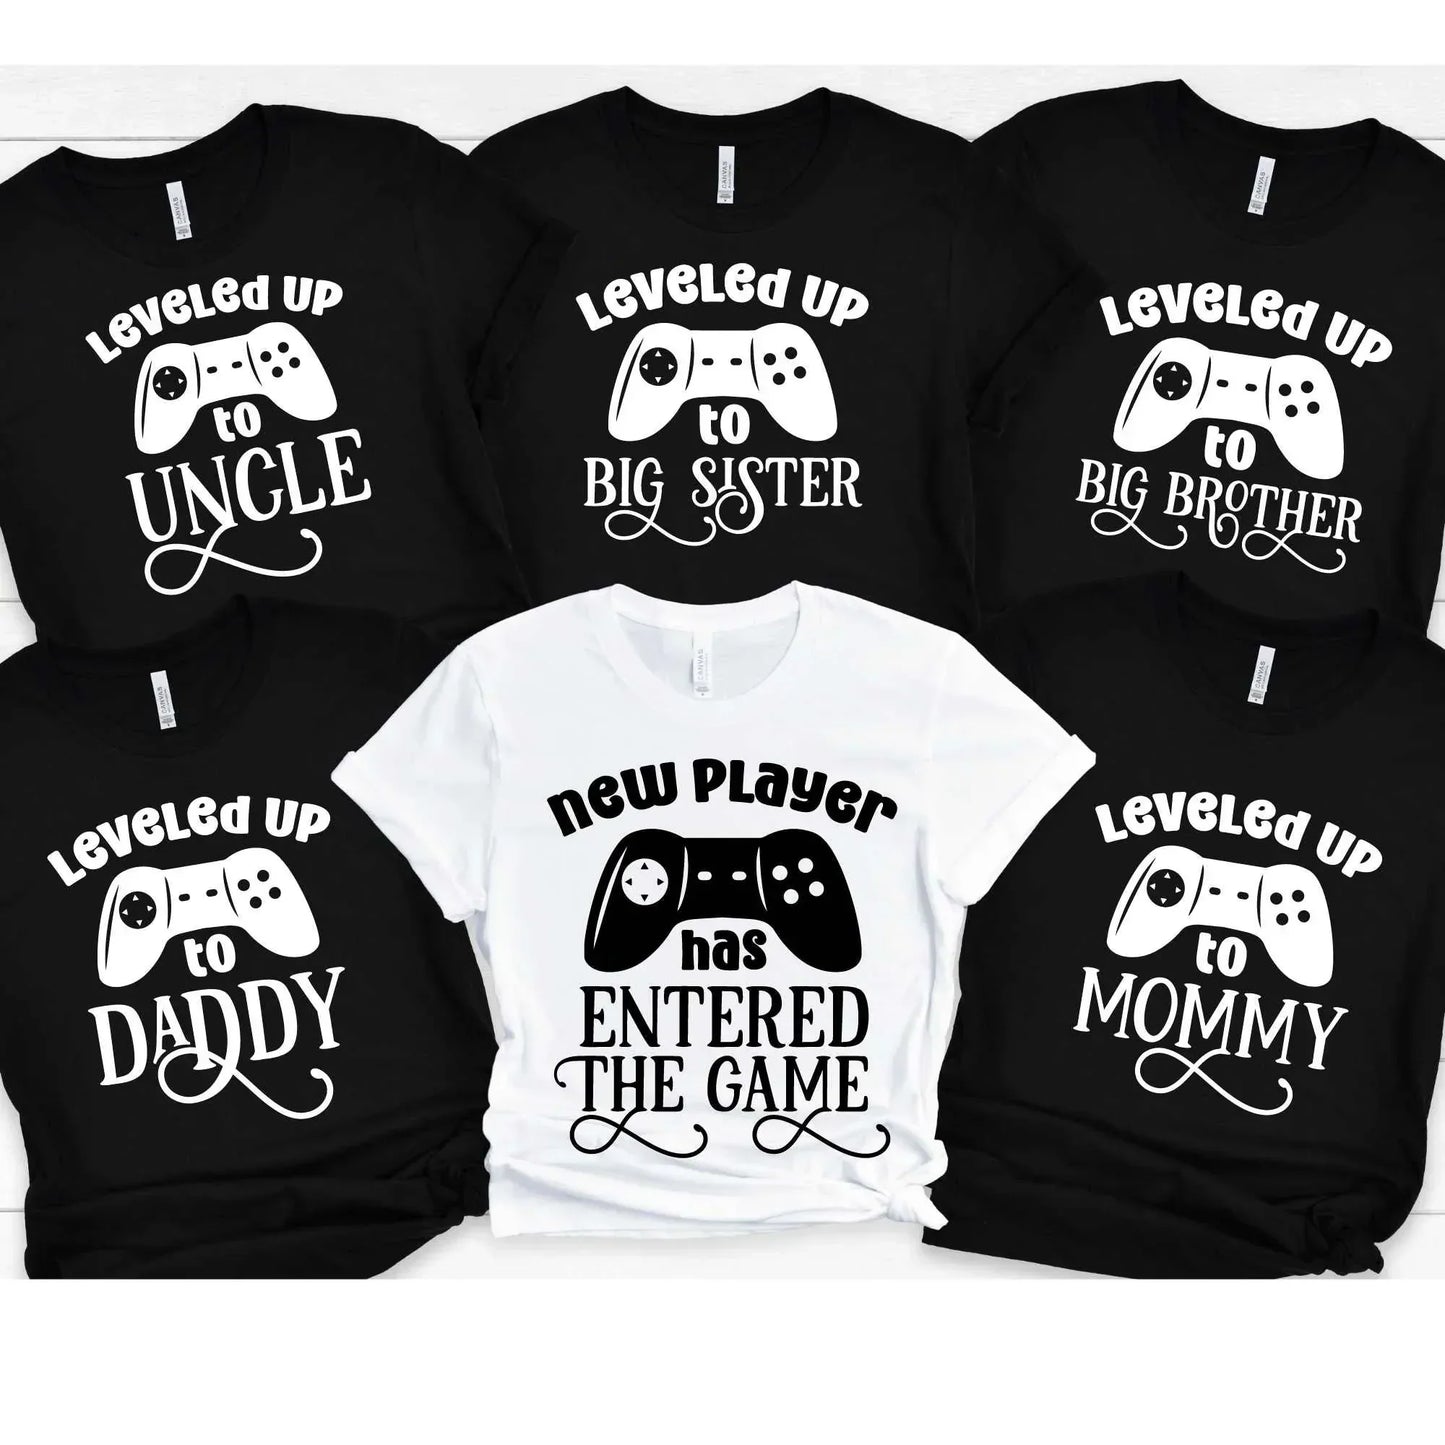 Pregnancy Reveal Shirts, Baby Announcement to Grandparents, Baby Shower Gifts, Video Game Family Matching T-shirts, 1st Time Parents HMDesignStudioUS